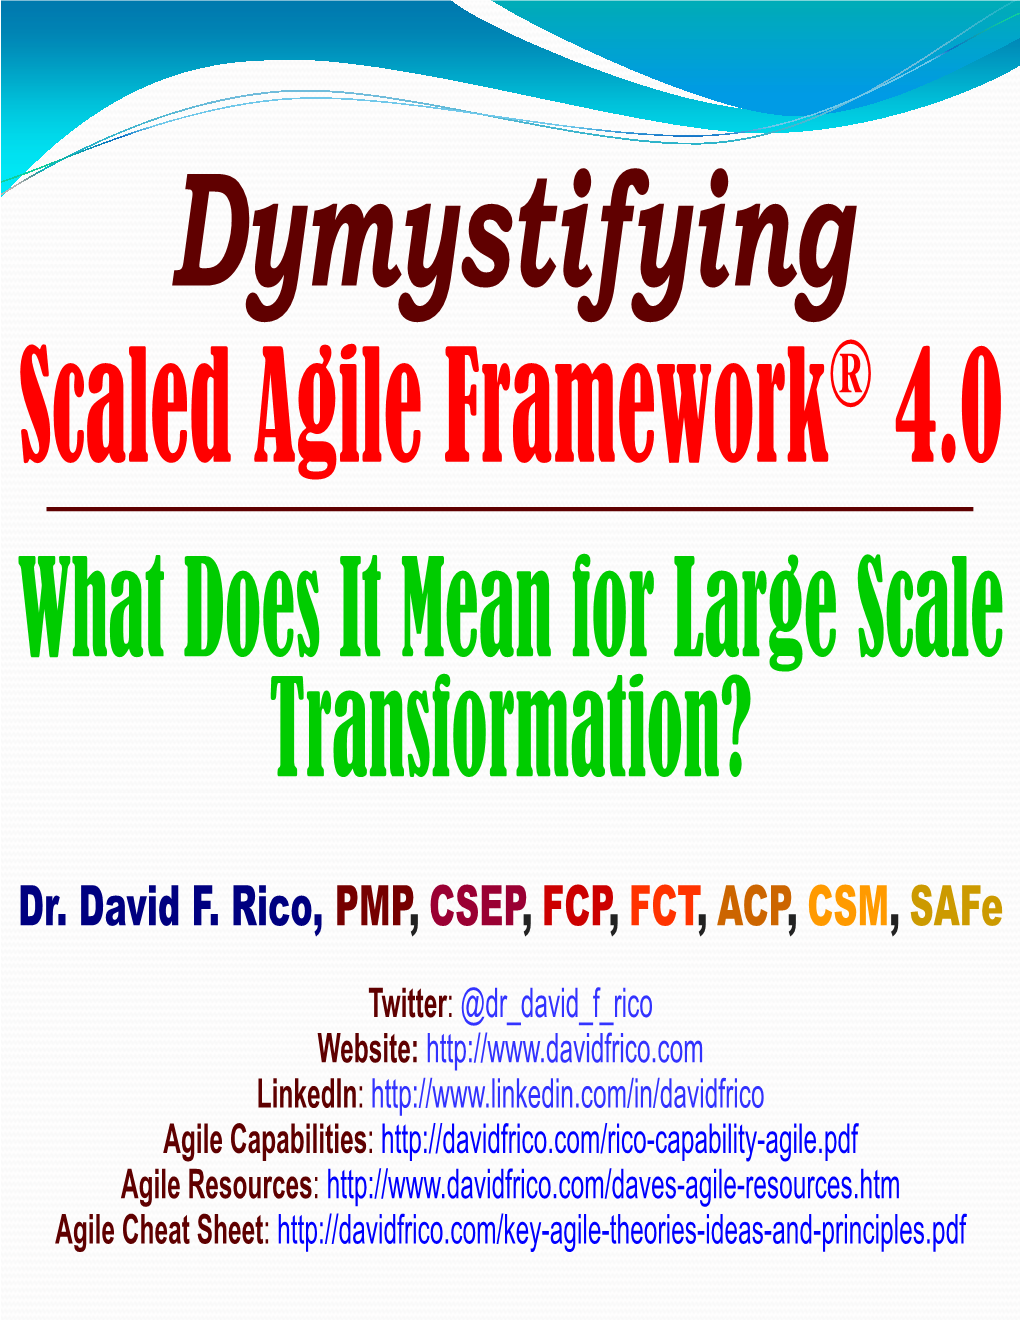 Scaled Agile Framework® 4.0 What Does It Mean for Large Scale Transformation?